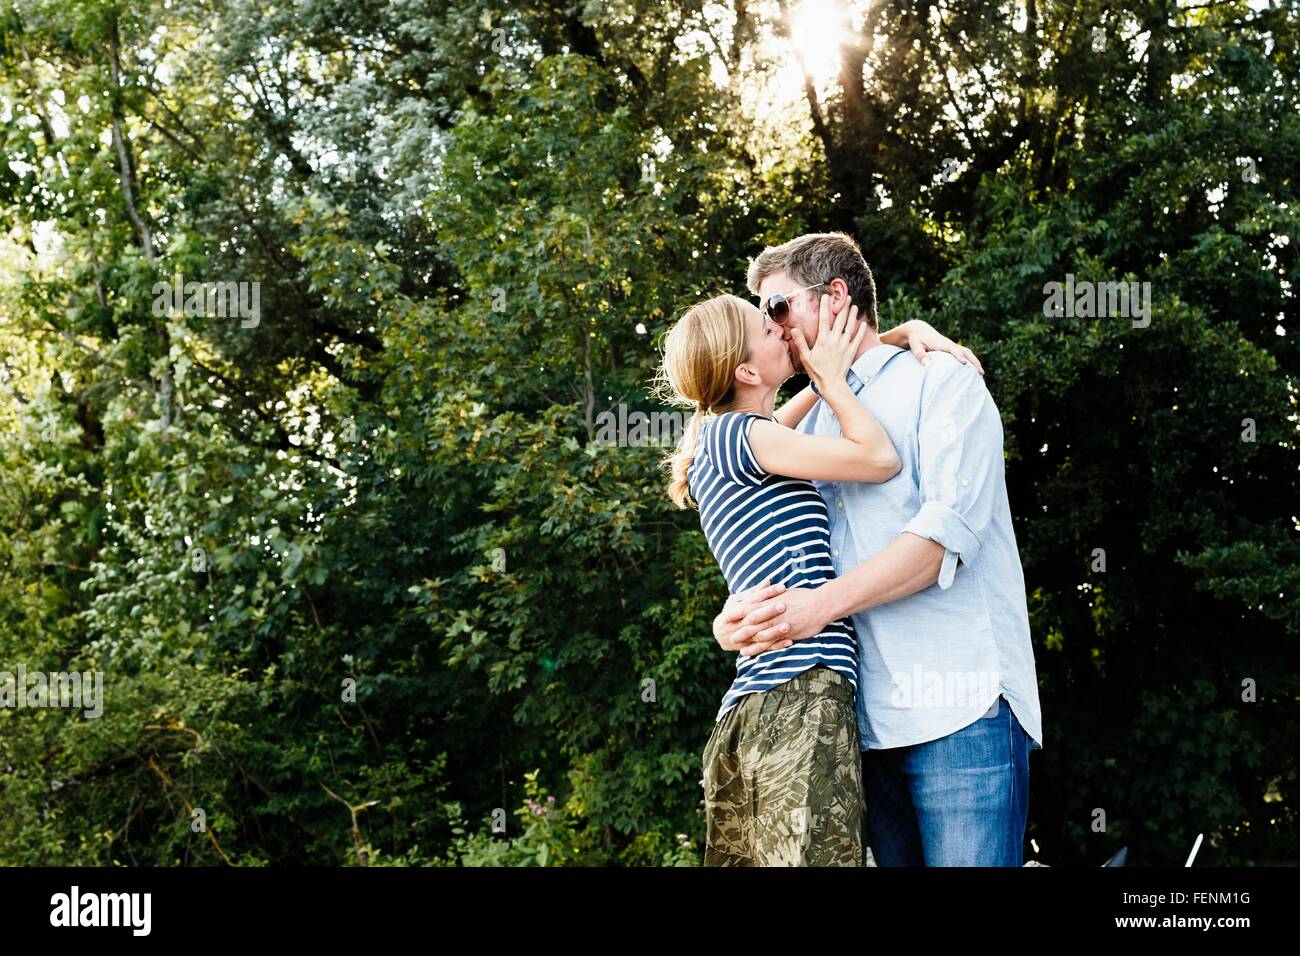 Couple sharing passionate kiss in park Stock Photo